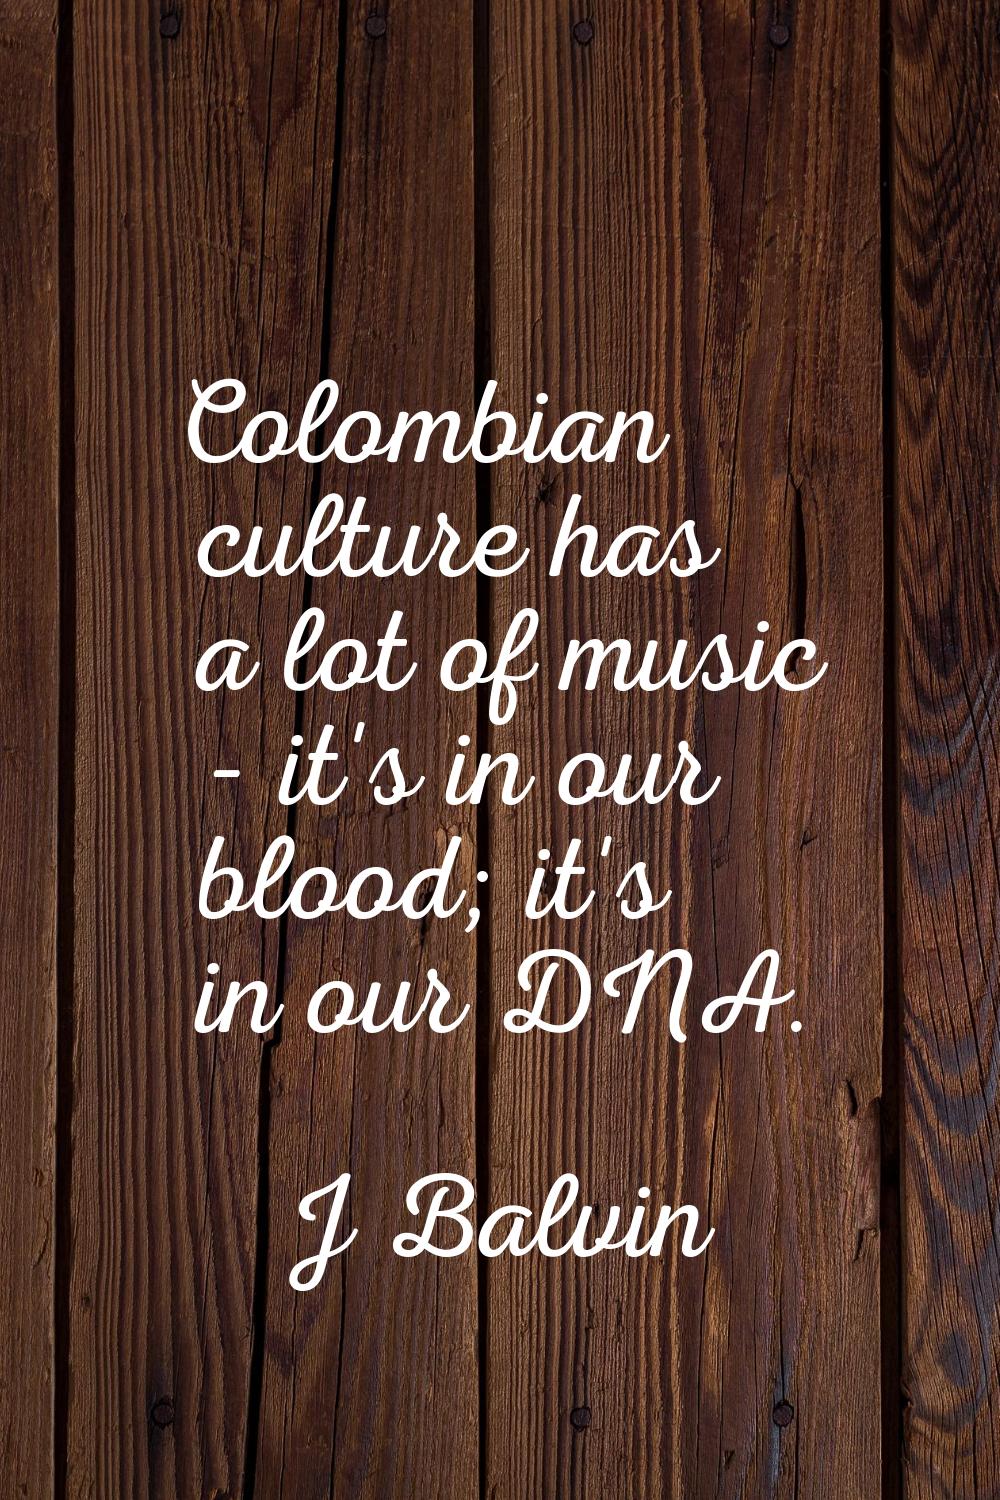 Colombian culture has a lot of music - it's in our blood; it's in our DNA.